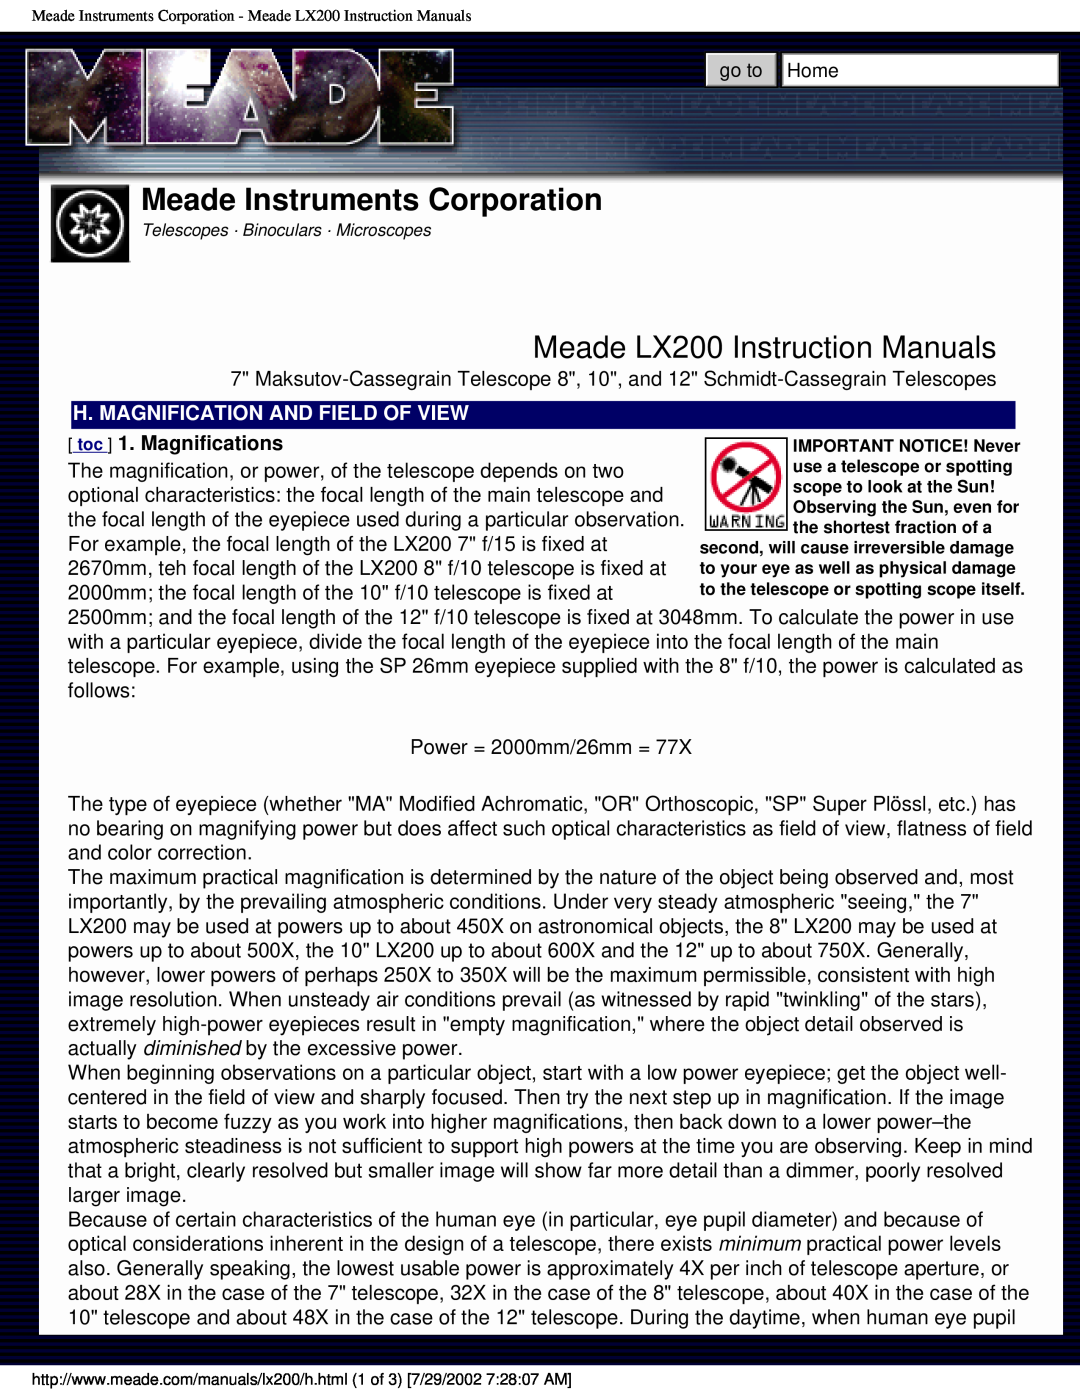 Meade instruction manual Meade Instruments Corporation, Meade LX200 Instruction Manuals, Power = 2000mm/26mm = 